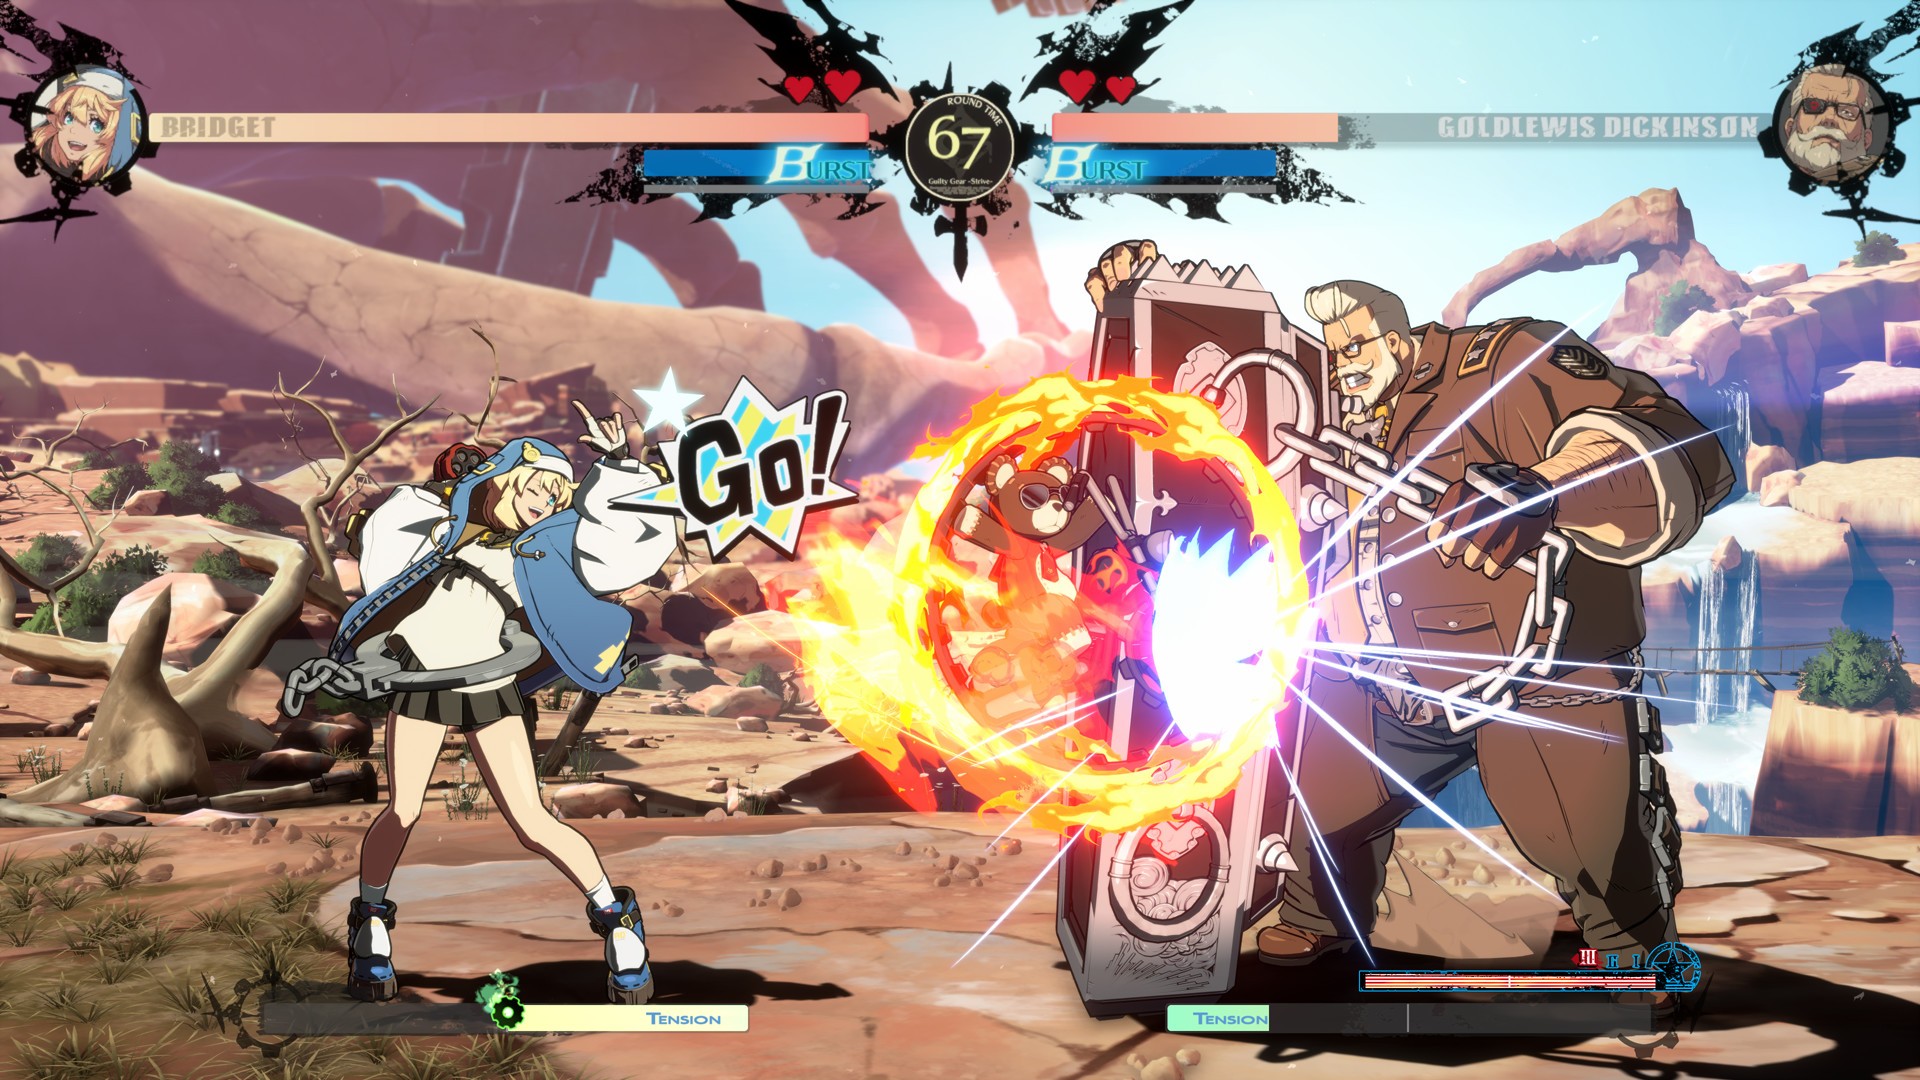 Guilty Gear: Controversy is Bridget trans or a trap? 